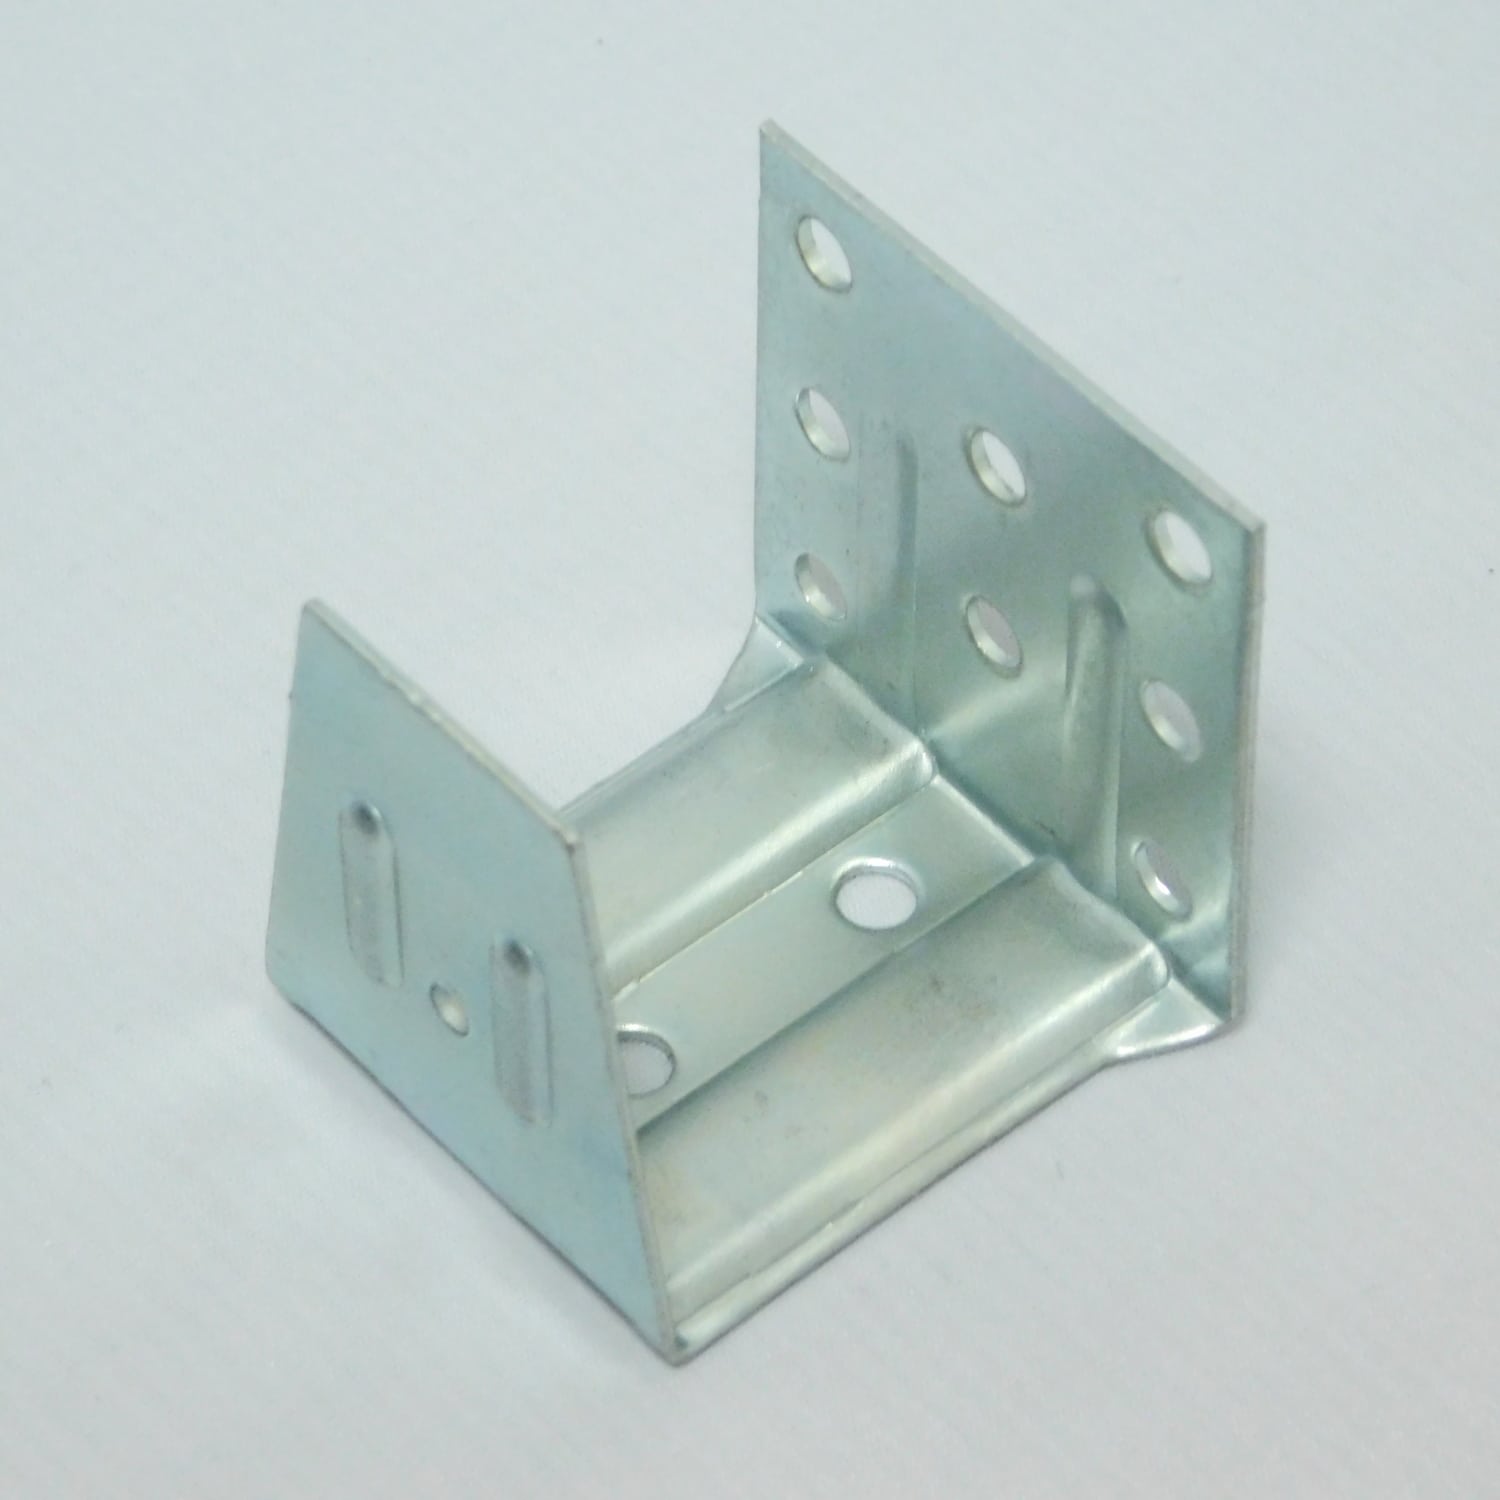 Details about   Low Profile Center Support Bracket for blinds 2 Pack 